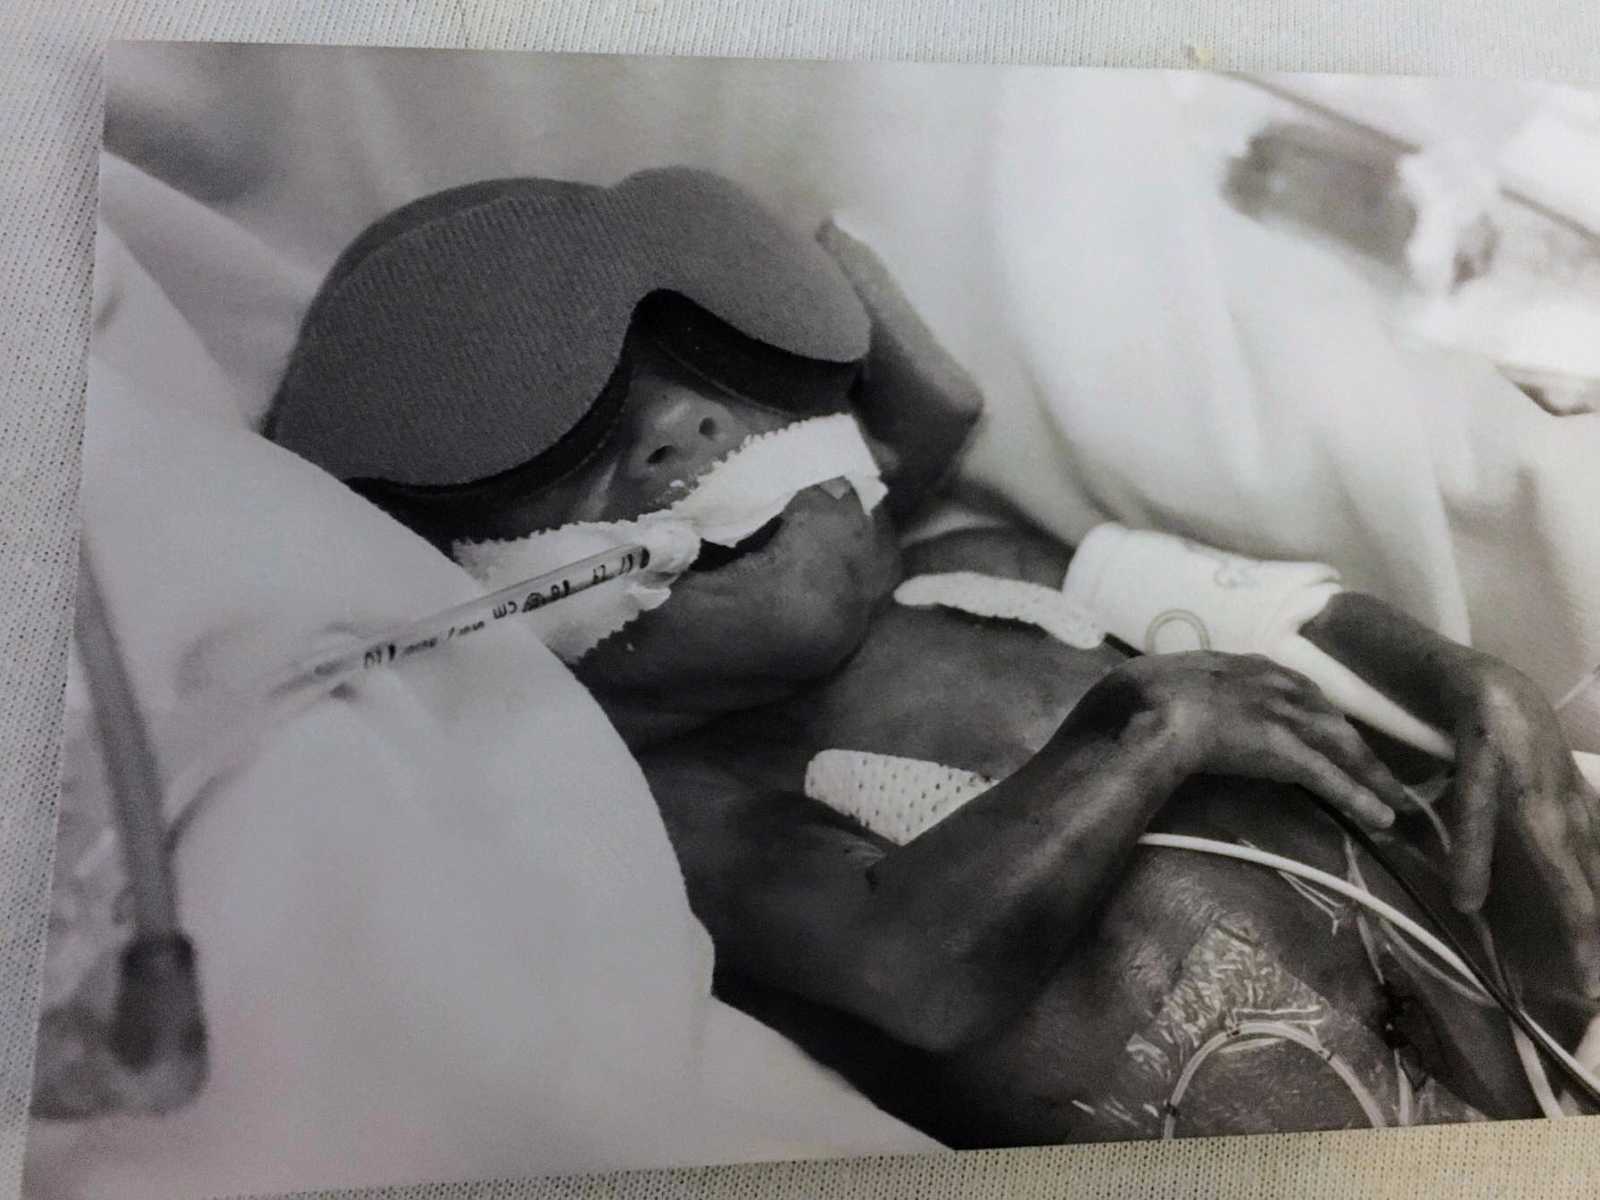 Preemie 1 pound baby lying in hospital bed with eye covers on and wires attached to her body